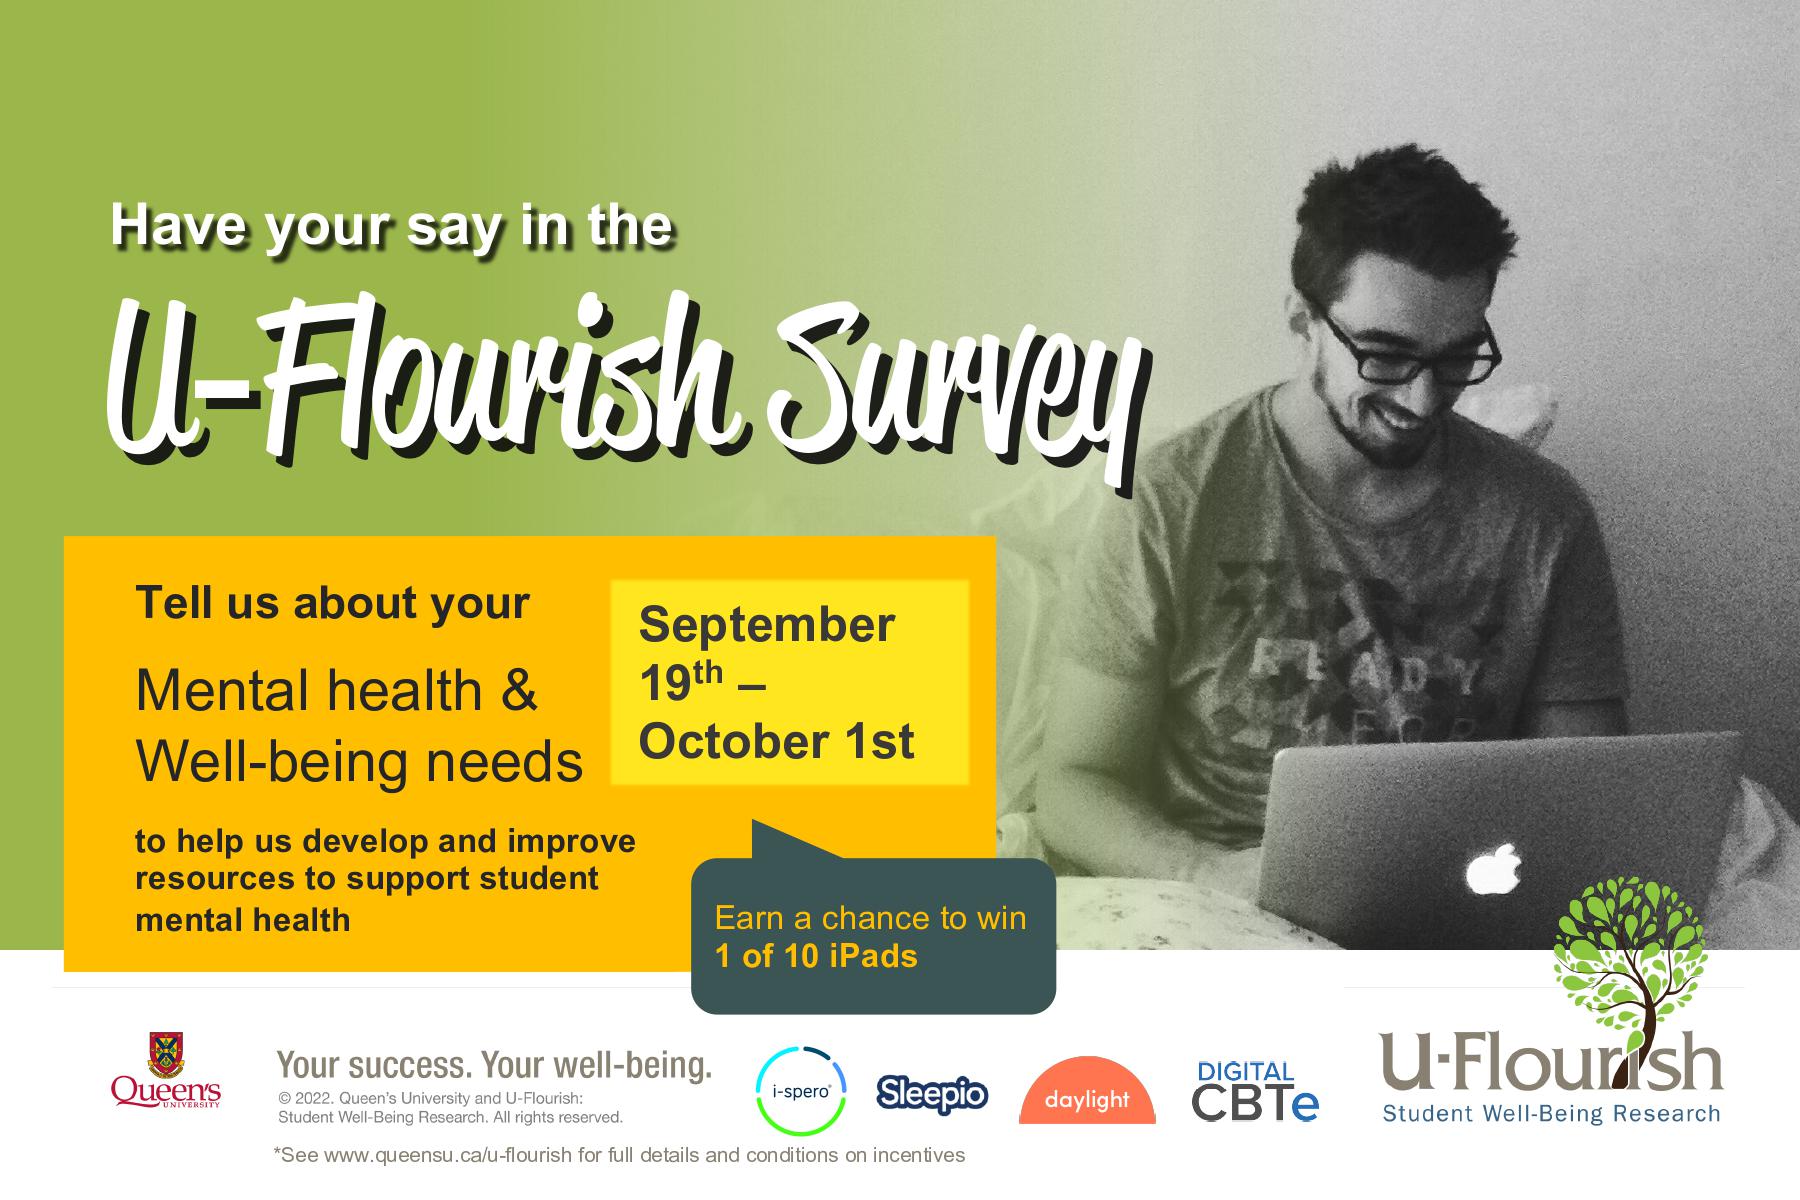 U-Flourish Fall Survey opens on September 19th and closes on October 1st